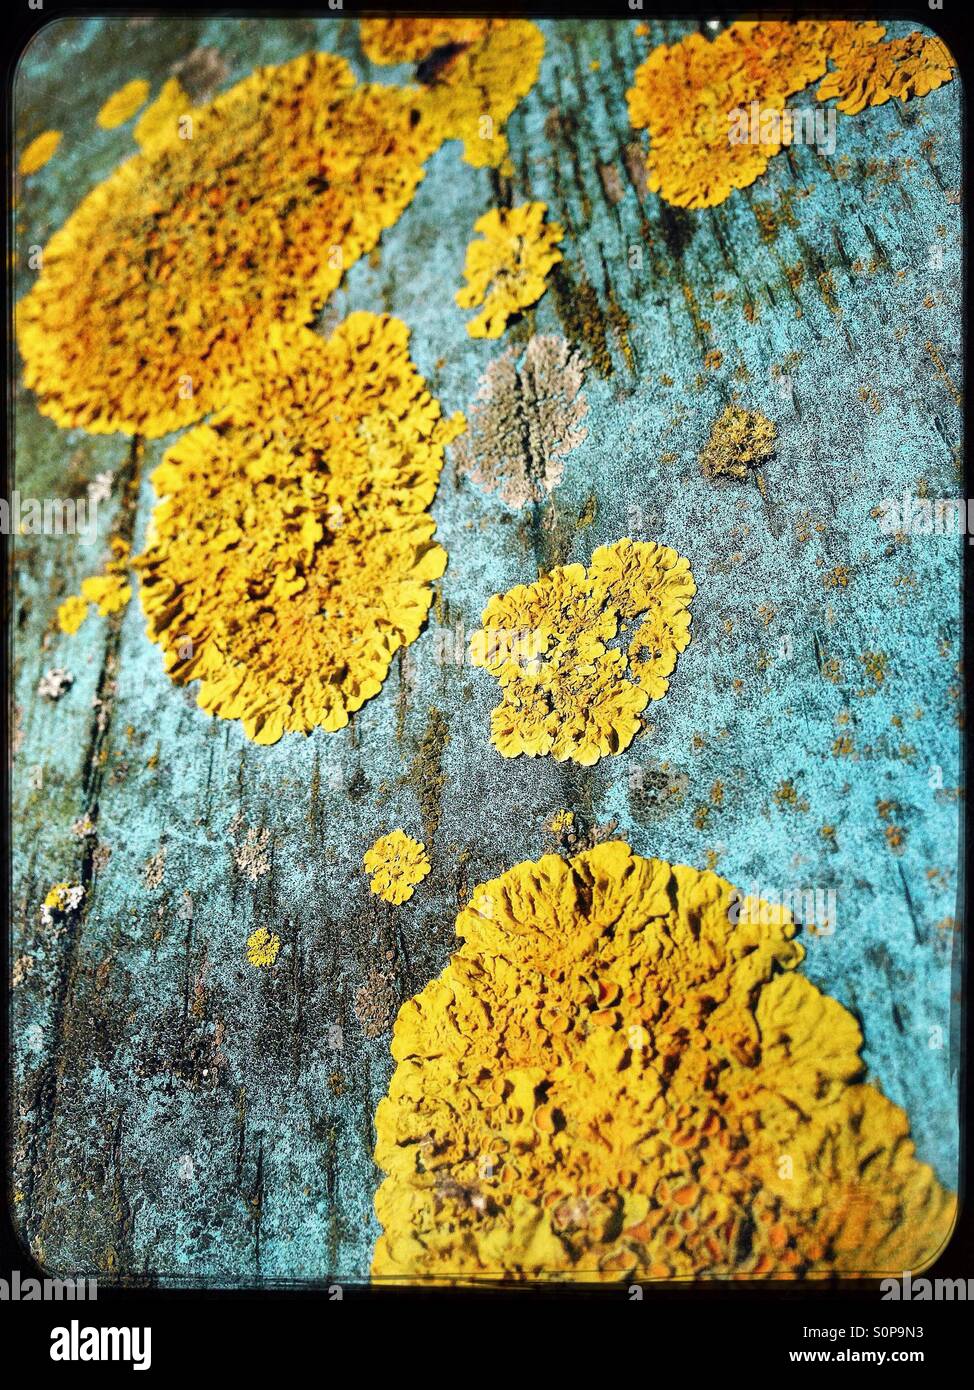 Yellow lichen on old blue painted wood Stock Photo